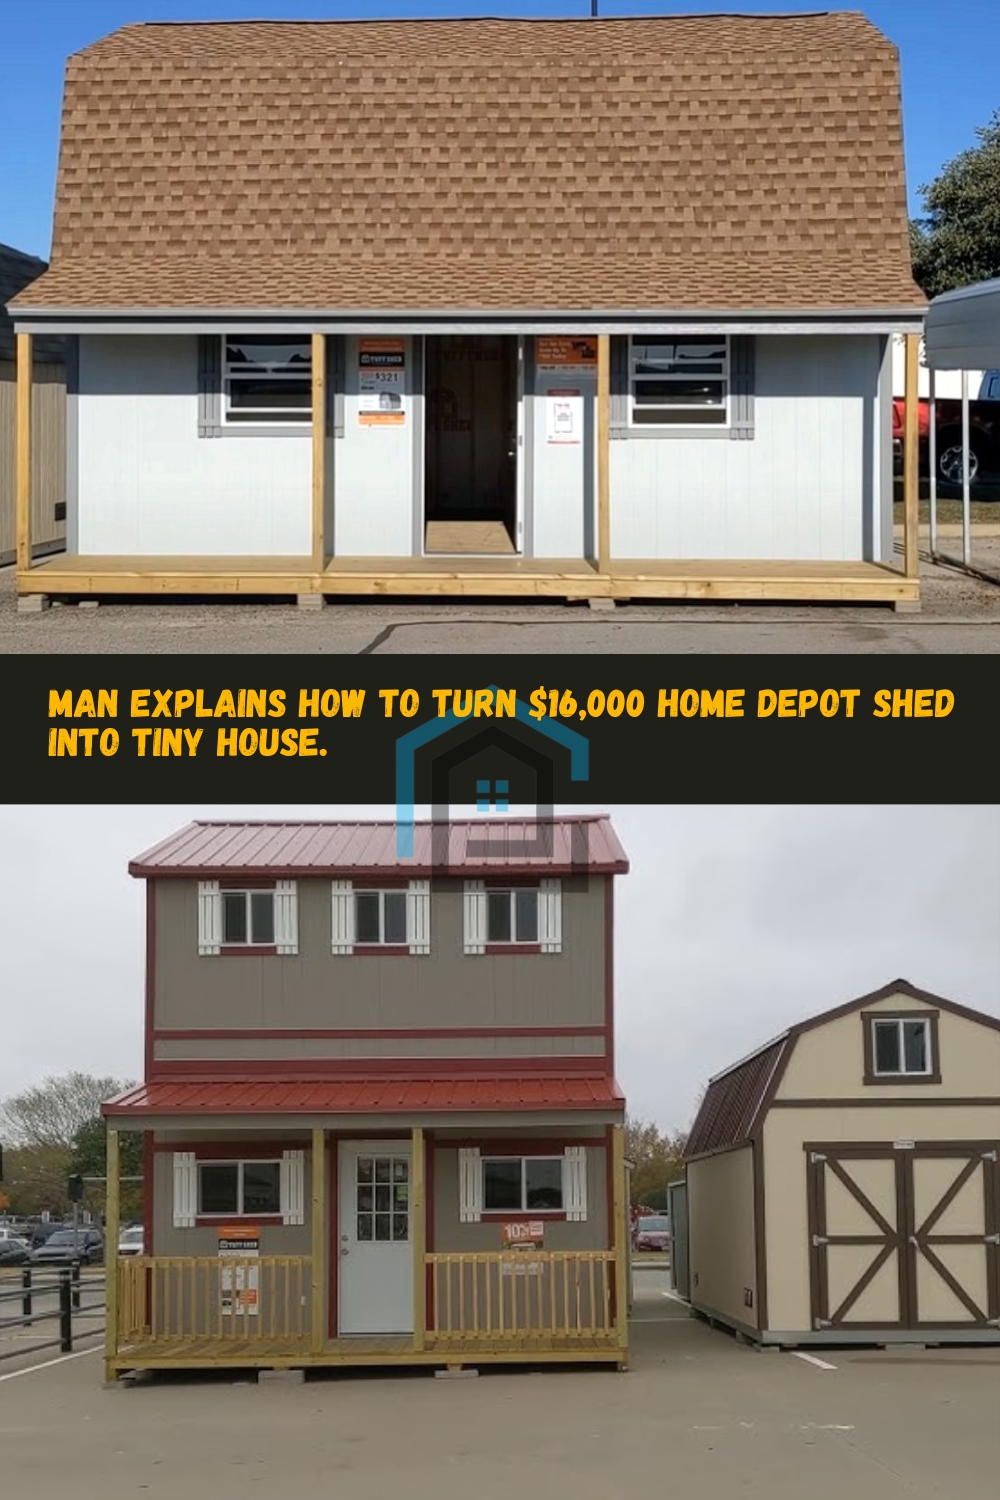 Man explains how to turn $16,000 Home Depot shed into tiny house pin